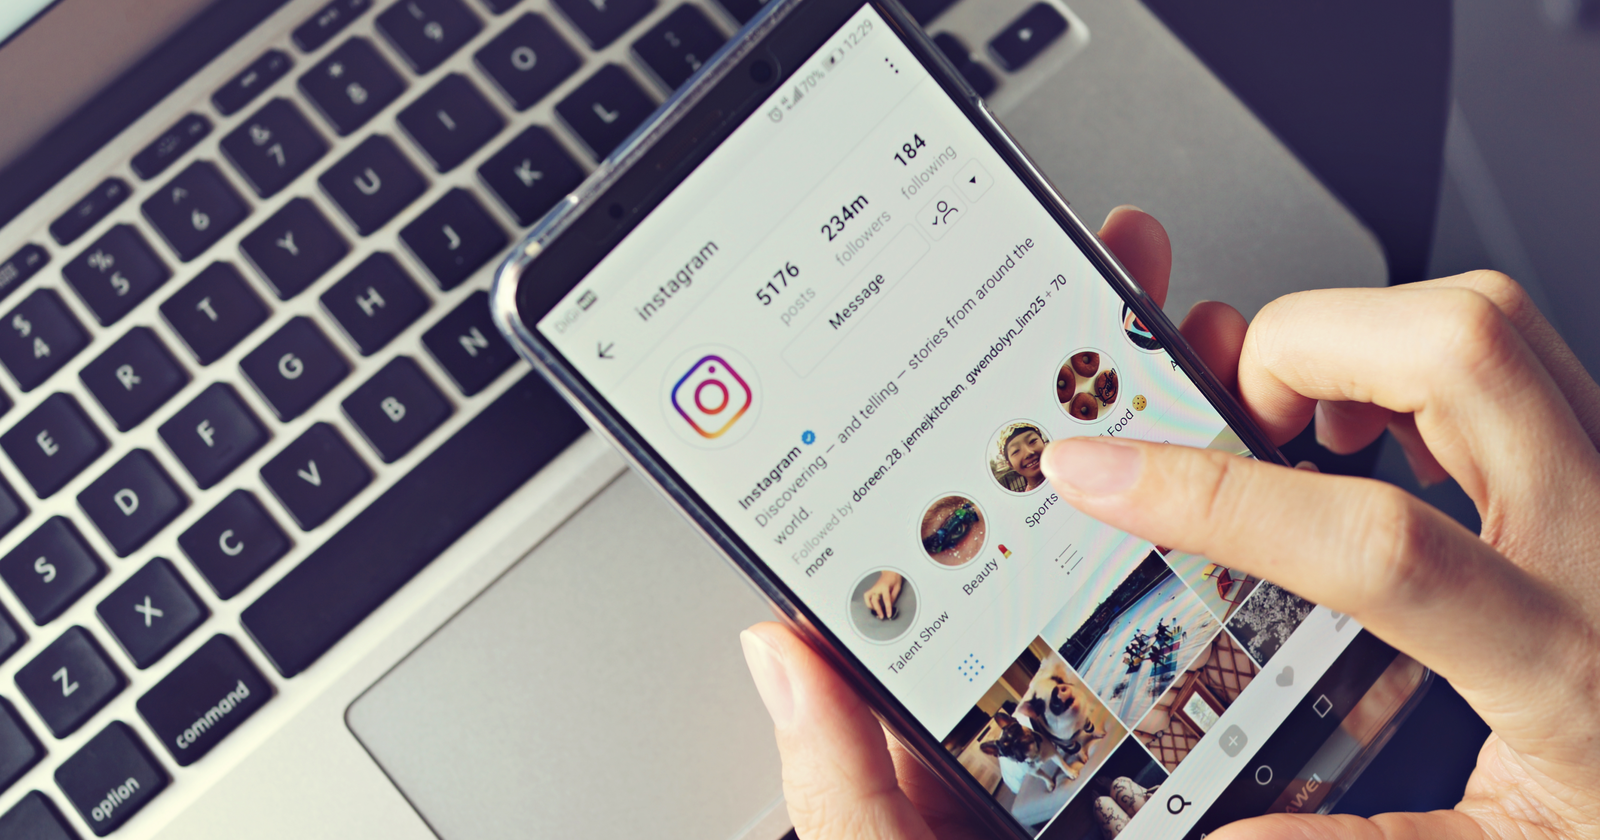 Instagram Analytics Guide - 4 of the Best Tools to Get Insights